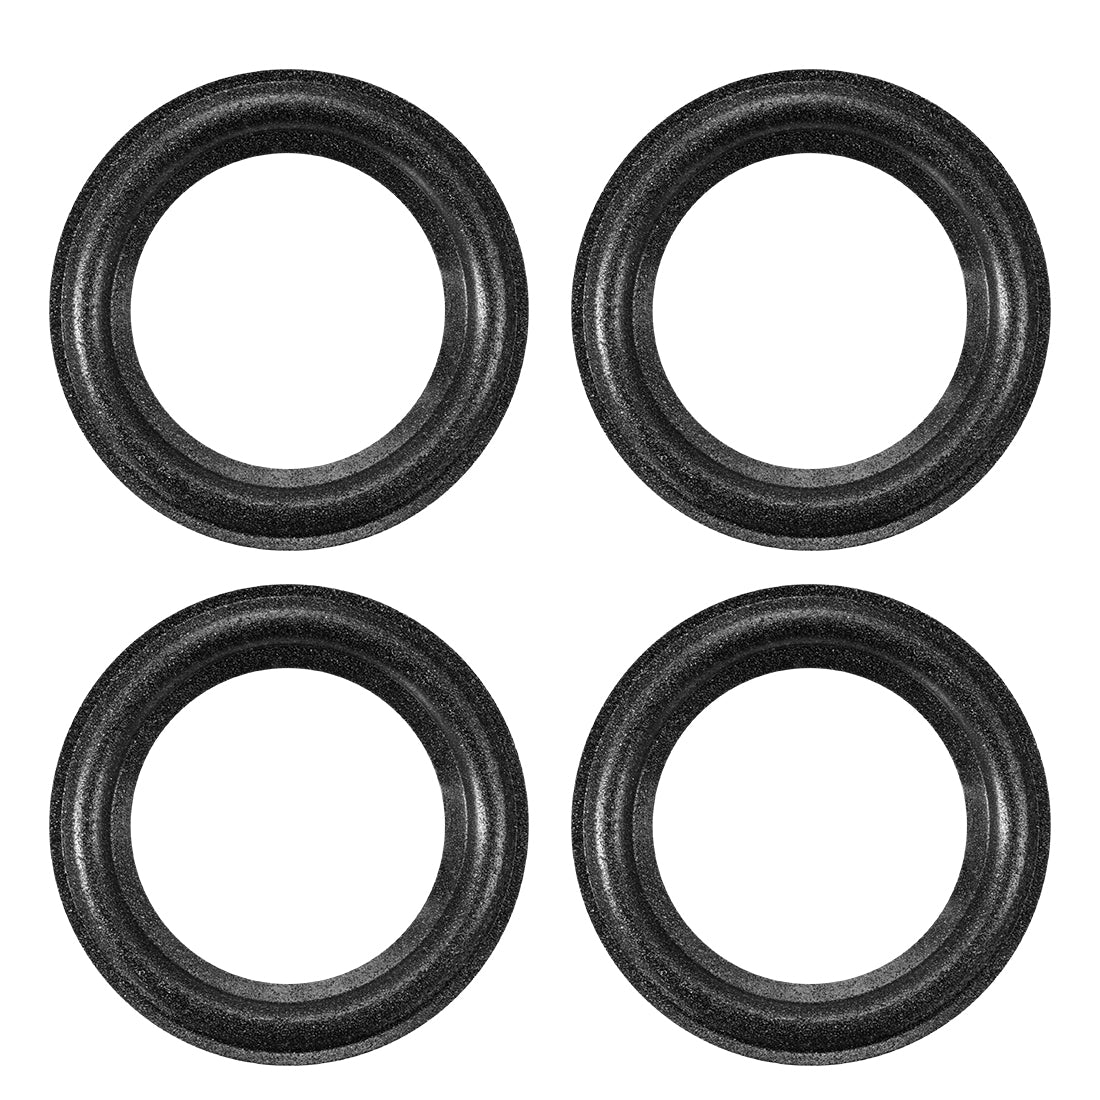 uxcell Uxcell 2"  2 inches Speaker Foam Edge Surround Rings Replacement Parts for Speaker Repair or DIY 4pcs